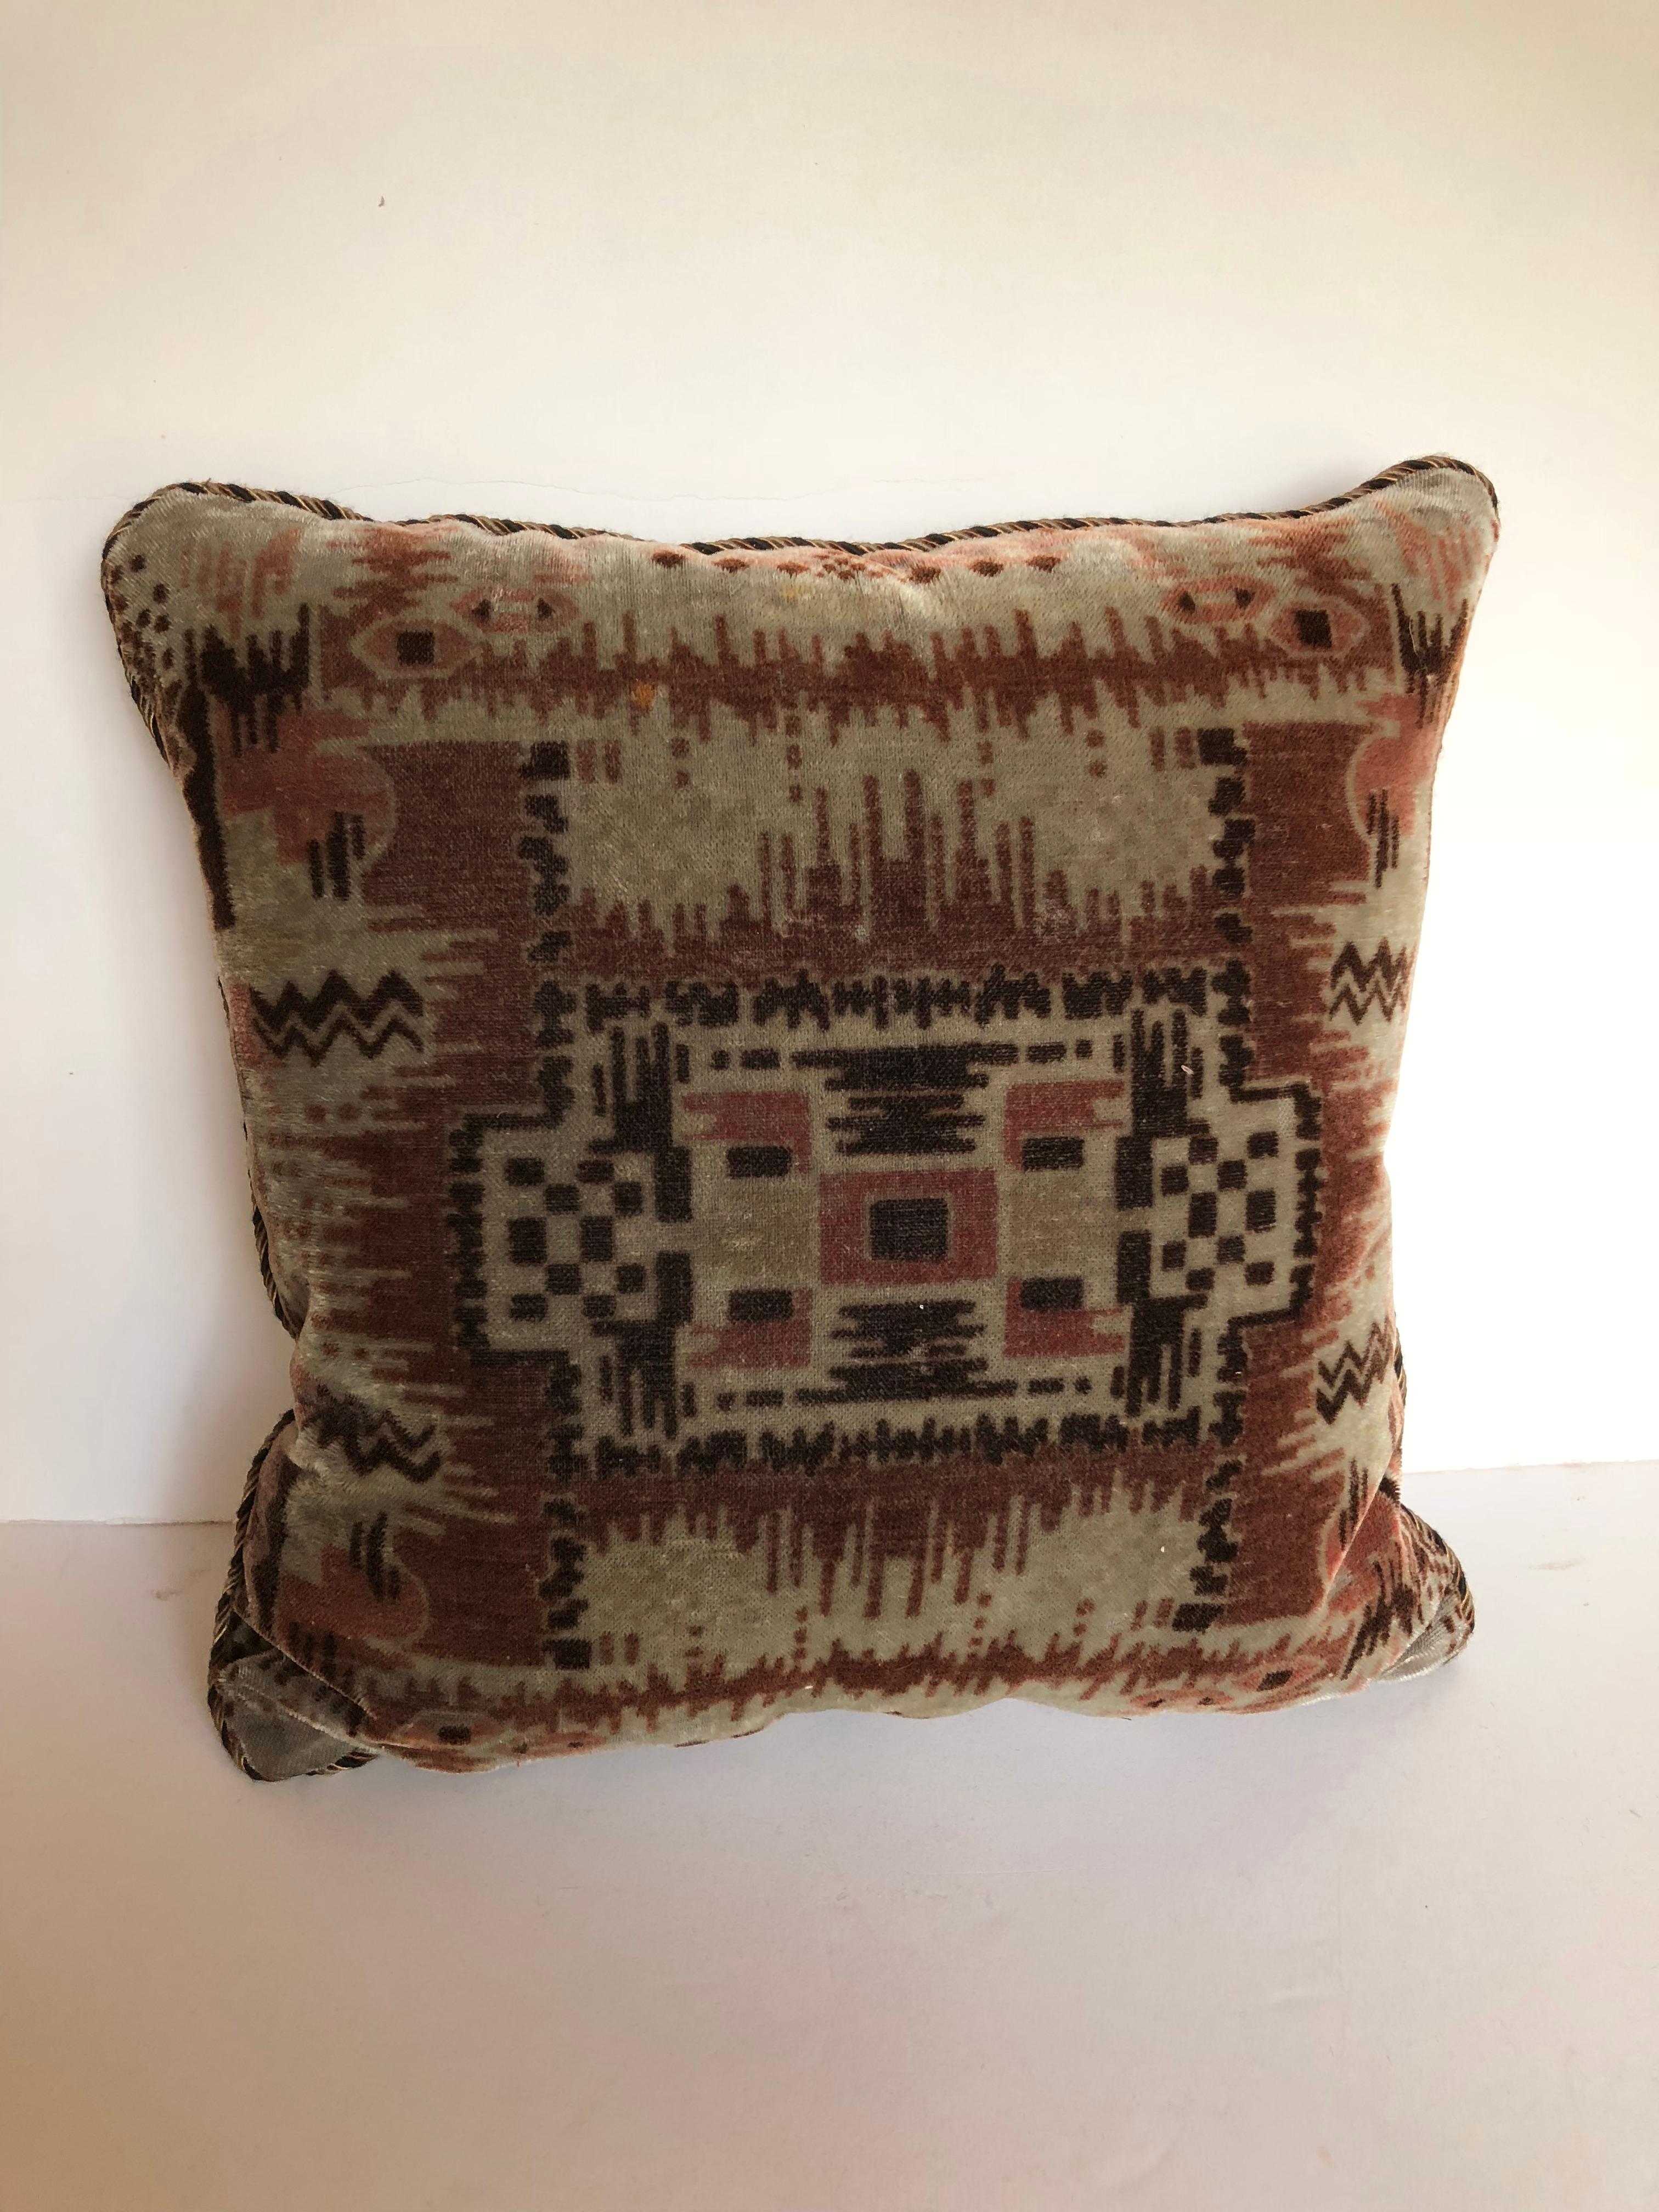 Custom pillow cut from an antique mohair Amsterdam School textile, circa 1915 - 1927. Art Deco design is hand blocked with good color and a soft hand. Very rare textile. Pillow is filled with an insert of 50/50 down and feathers, backed in dark